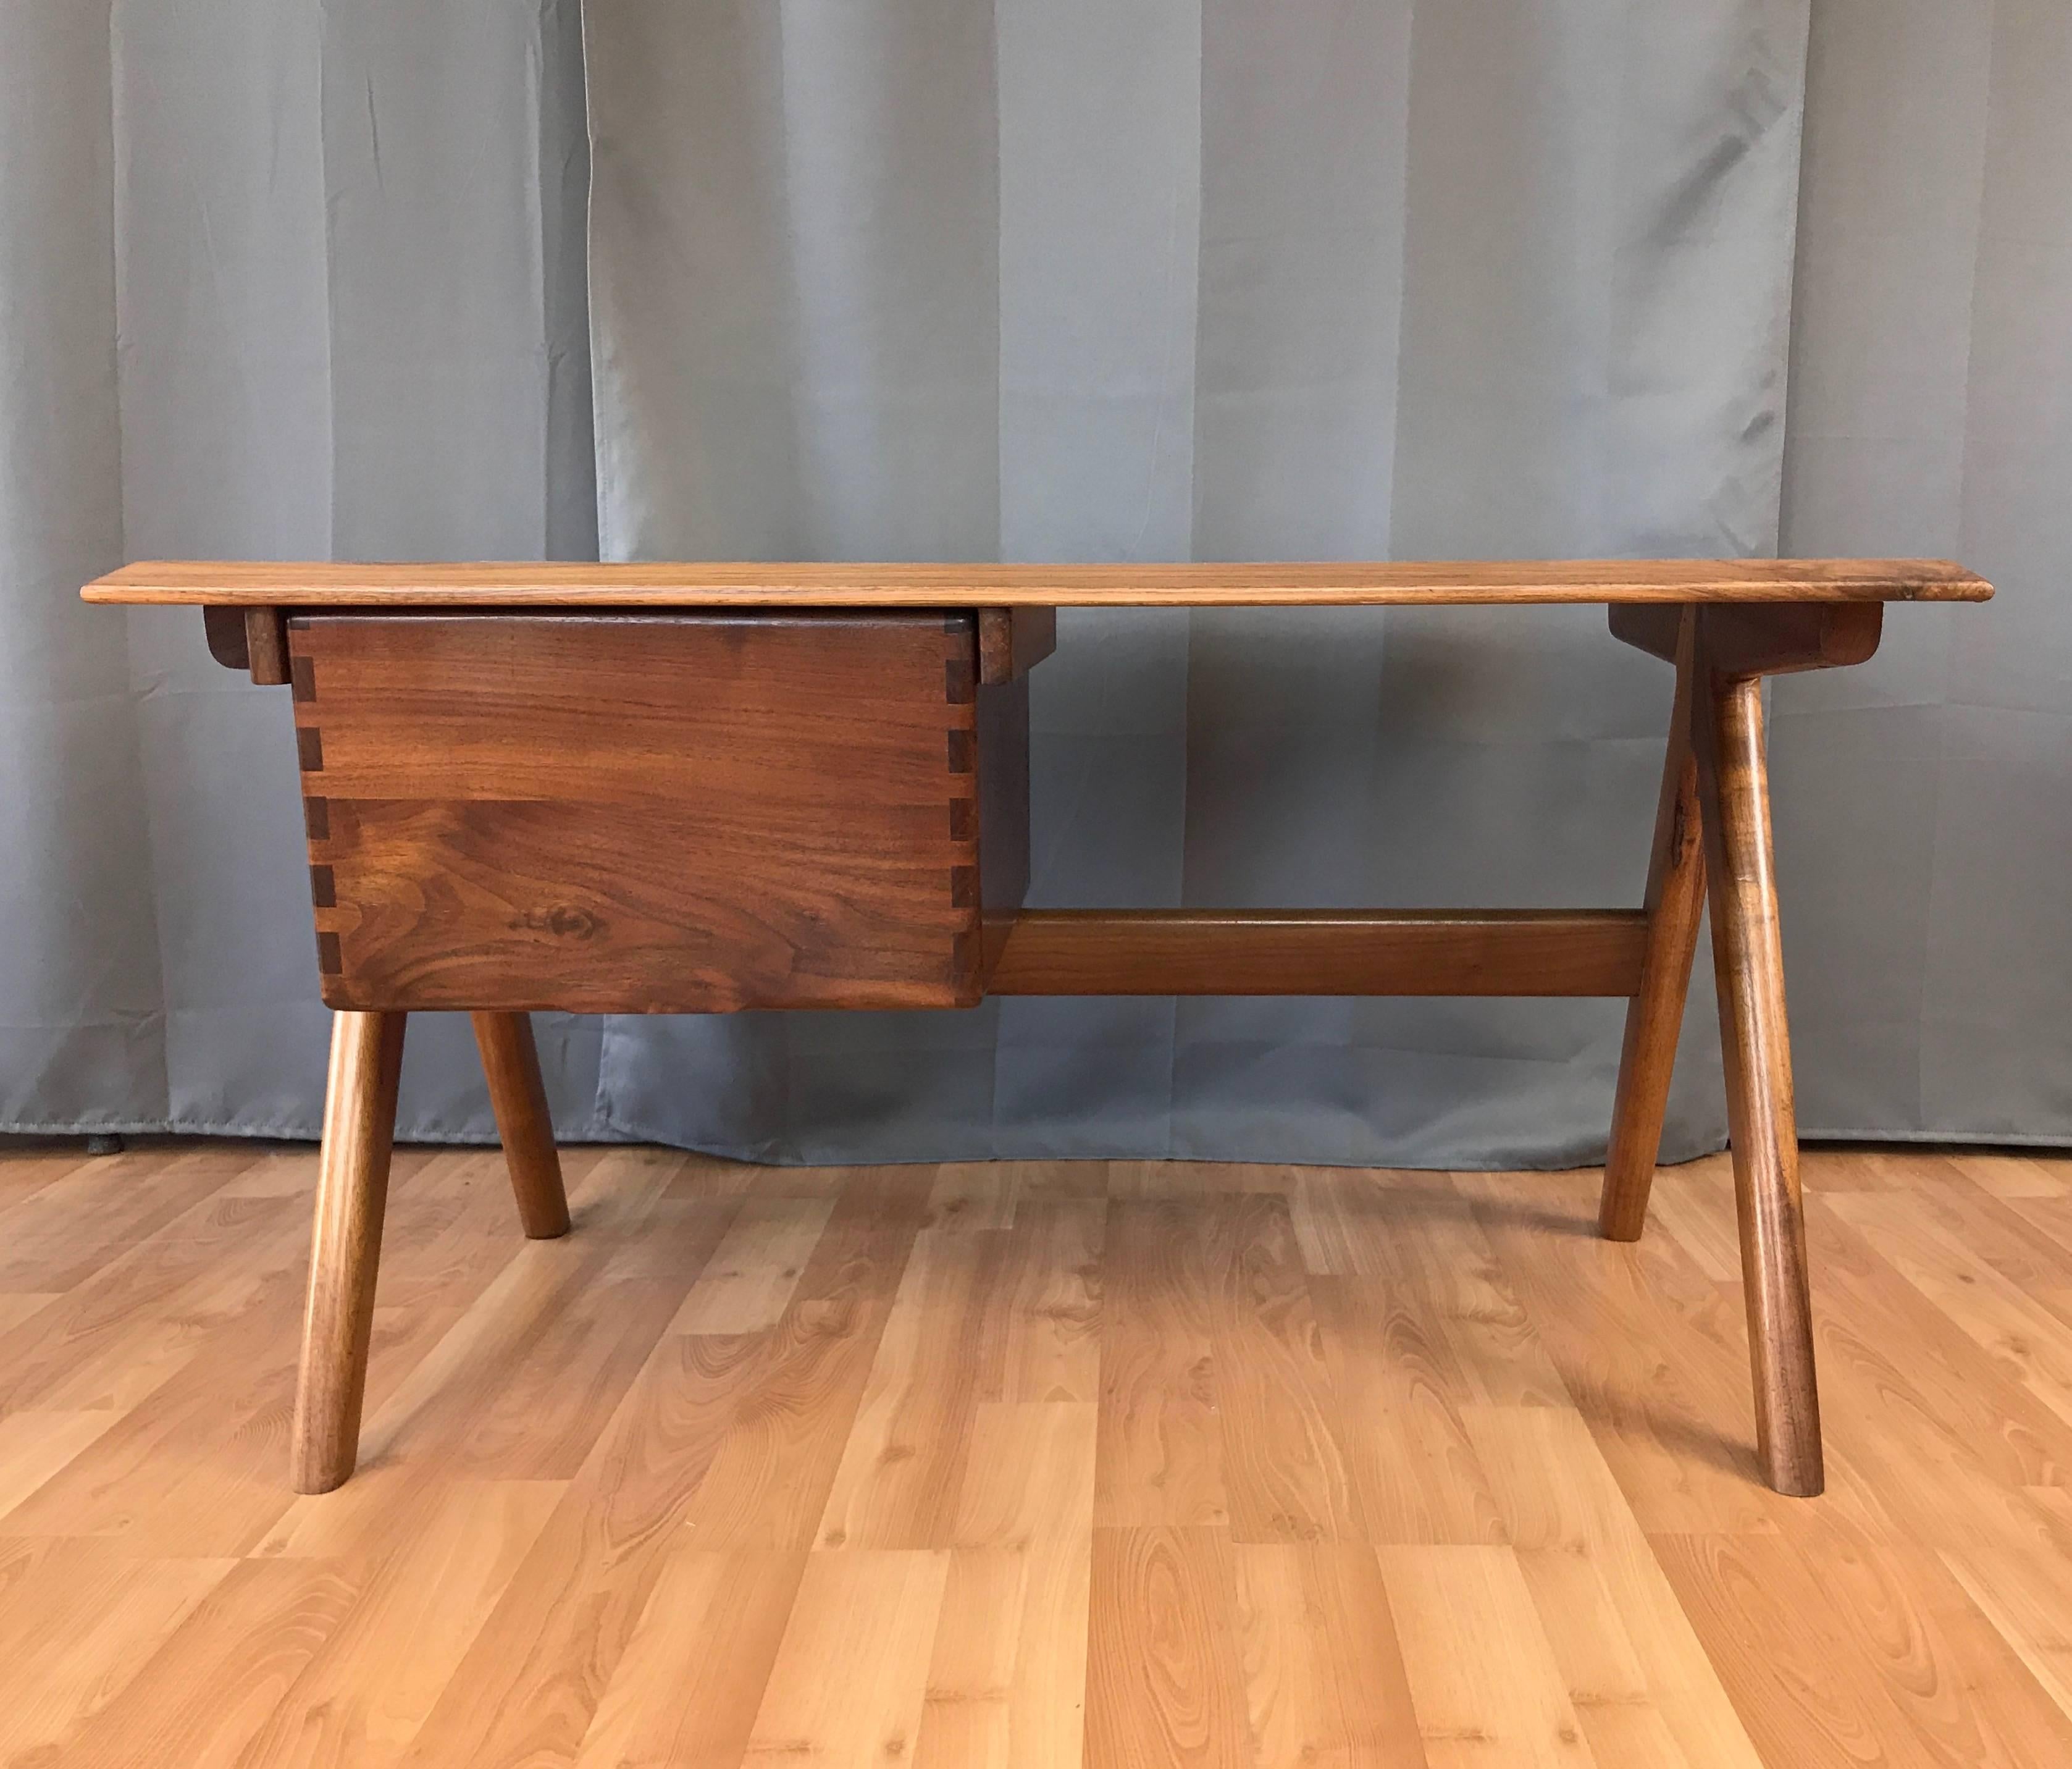 A substantial solid rosewood and padauk desk with drawer by Berkeley, California, master woodworker Jim Sweeny.

Impressive craftsmanship and construction throughout. Expansive rosewood top has a broad knife edge. Suspended padauk drawer boasts